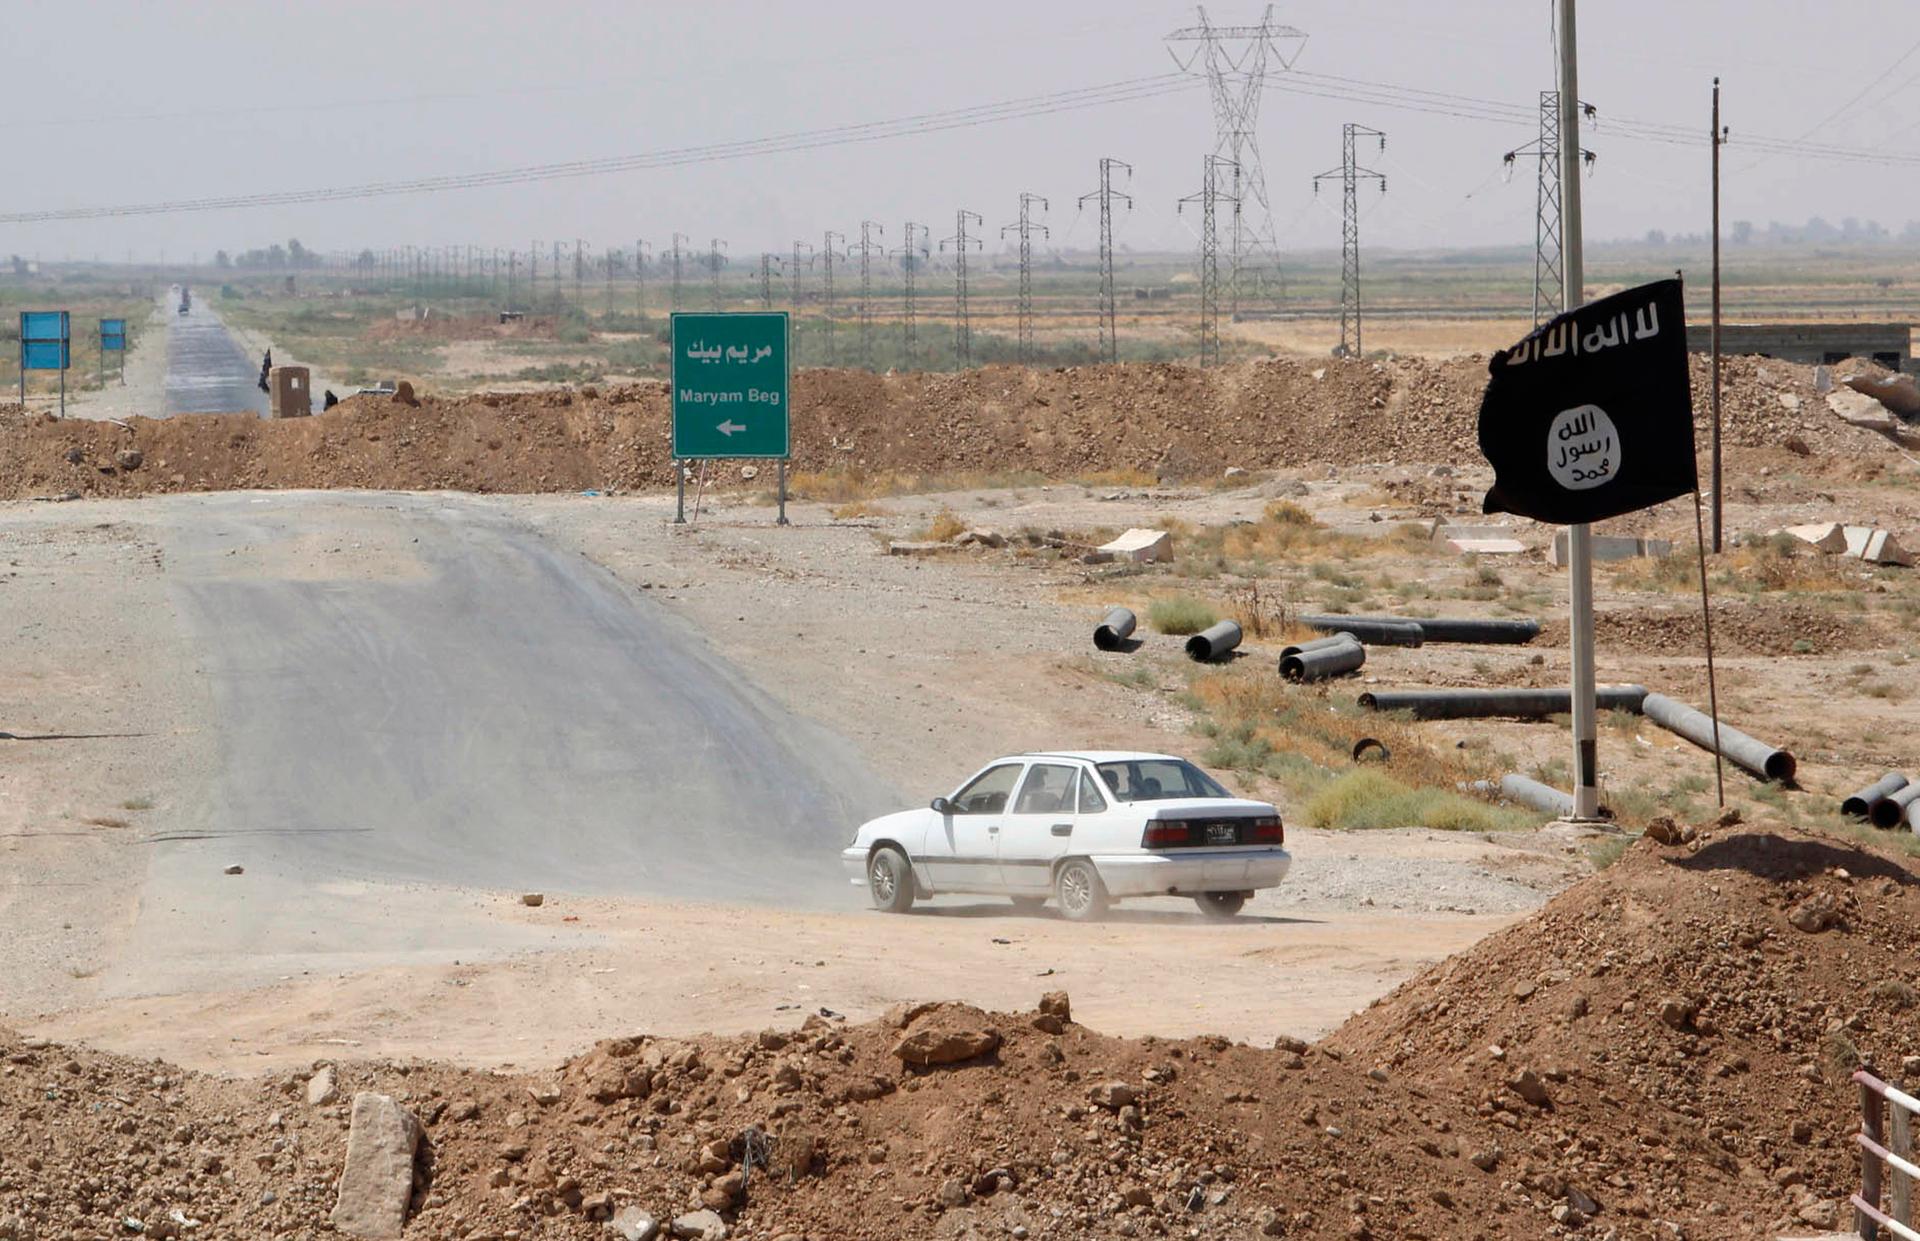 A car drives near a flag belonging to Islamic State militants at the end of a bridge in southern Kirkuk.